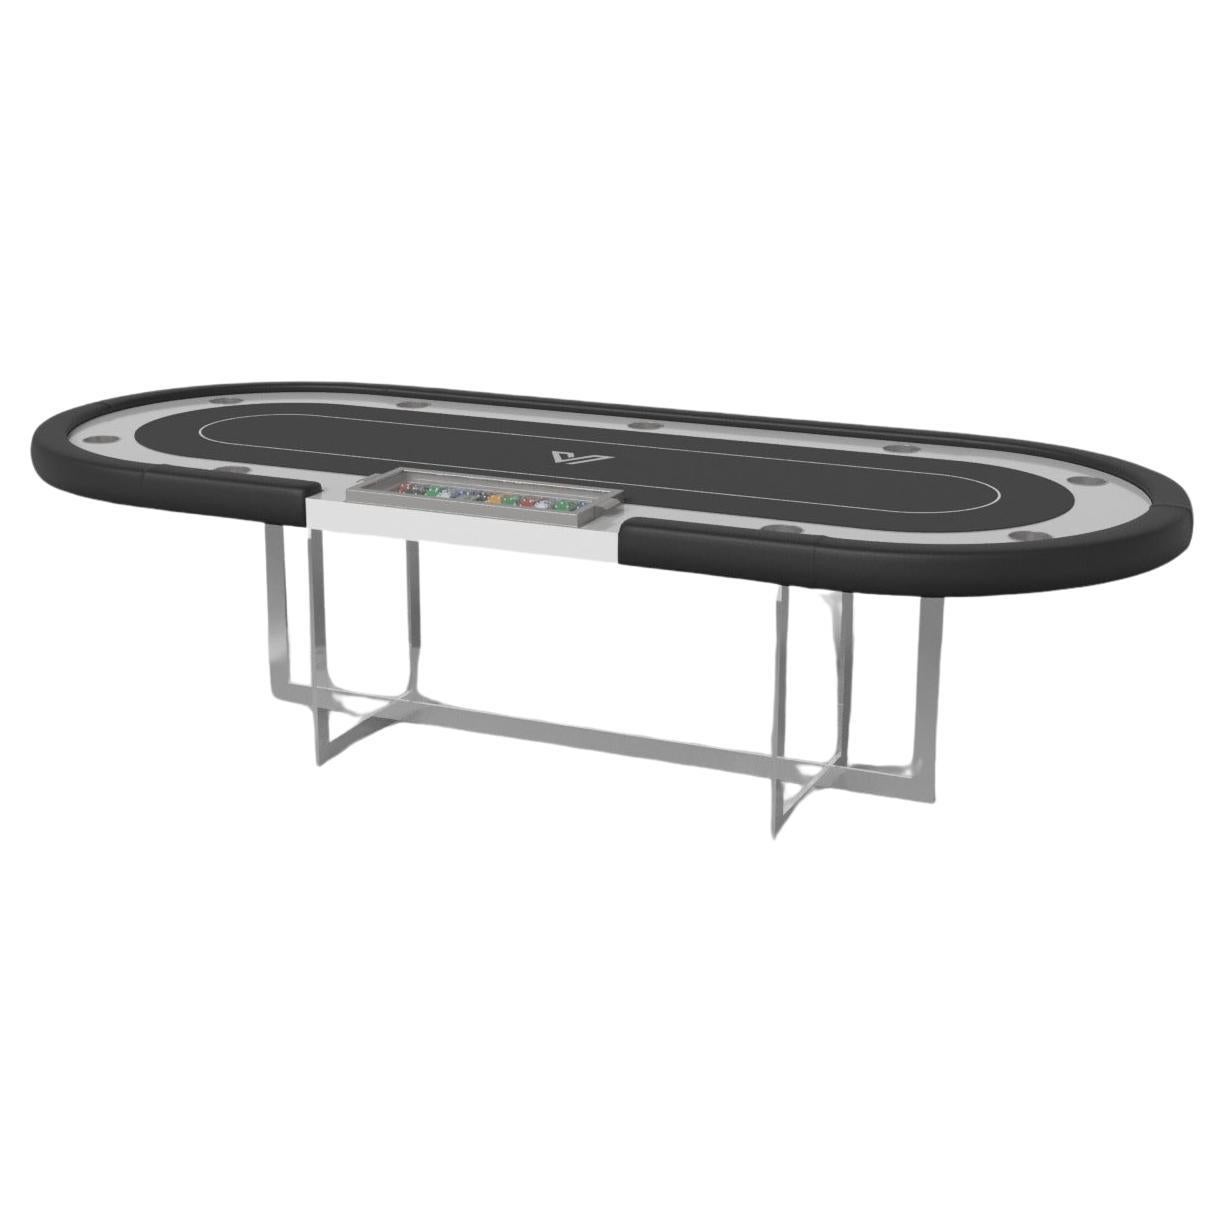 Elevate Customs Beso Poker Tables / Solid Pantone White Color in 8'8" - USA For Sale